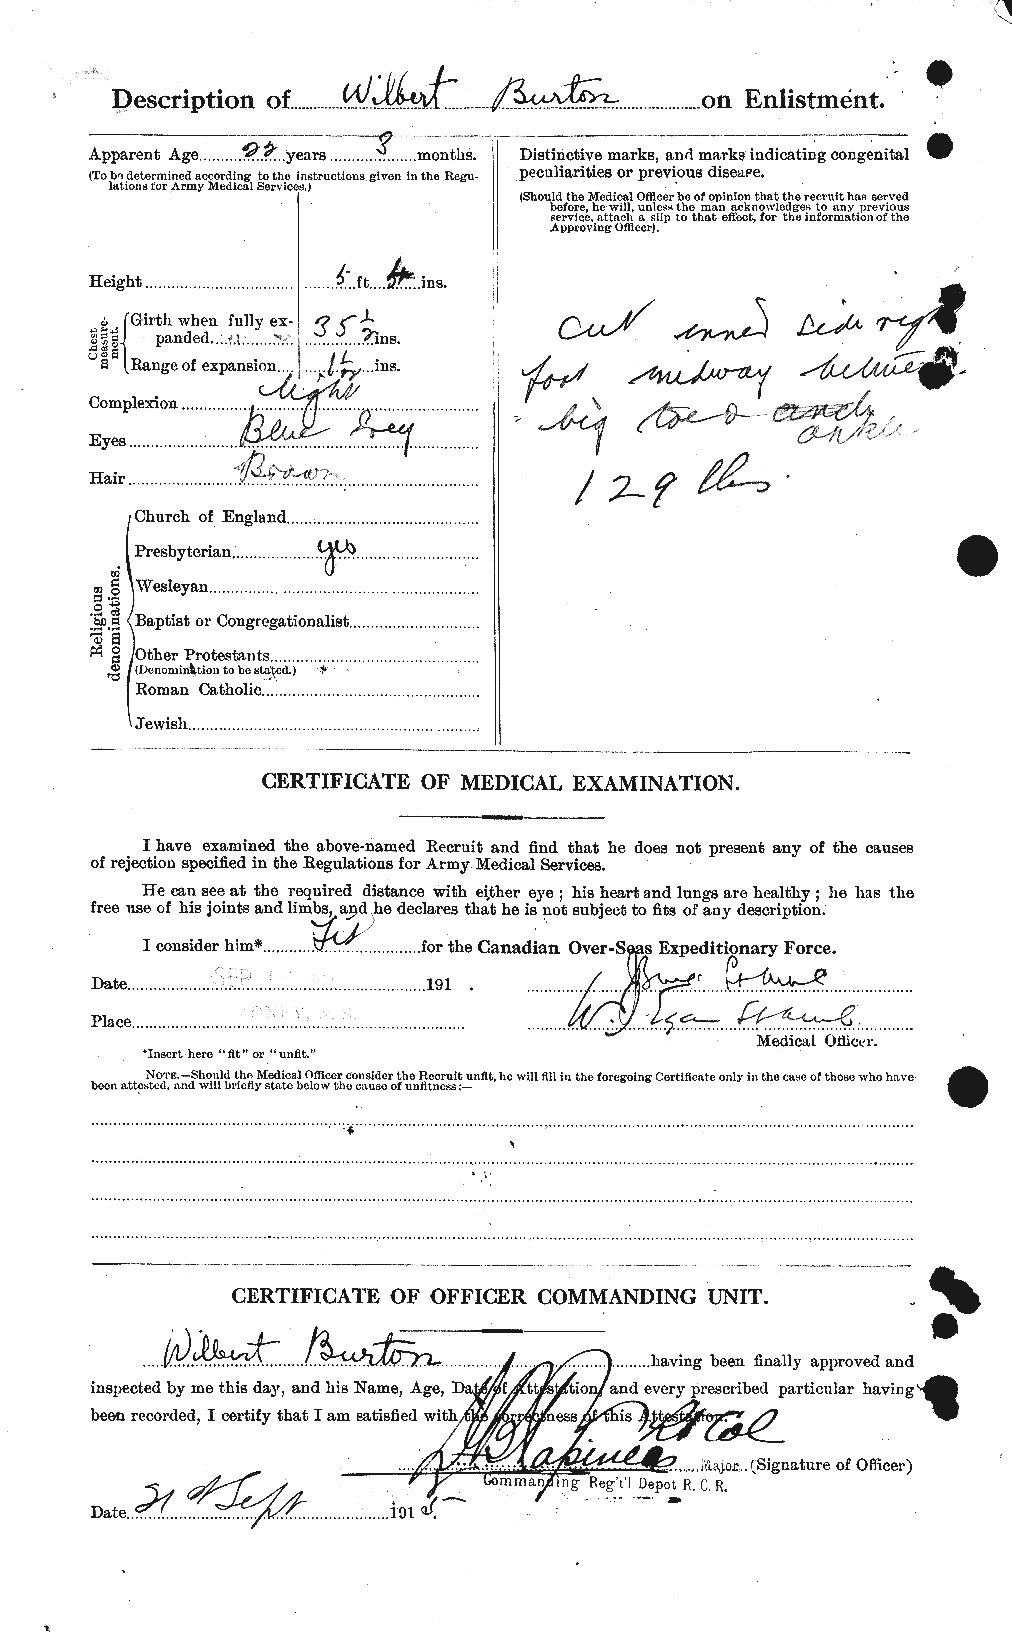 Personnel Records of the First World War - CEF 272736b